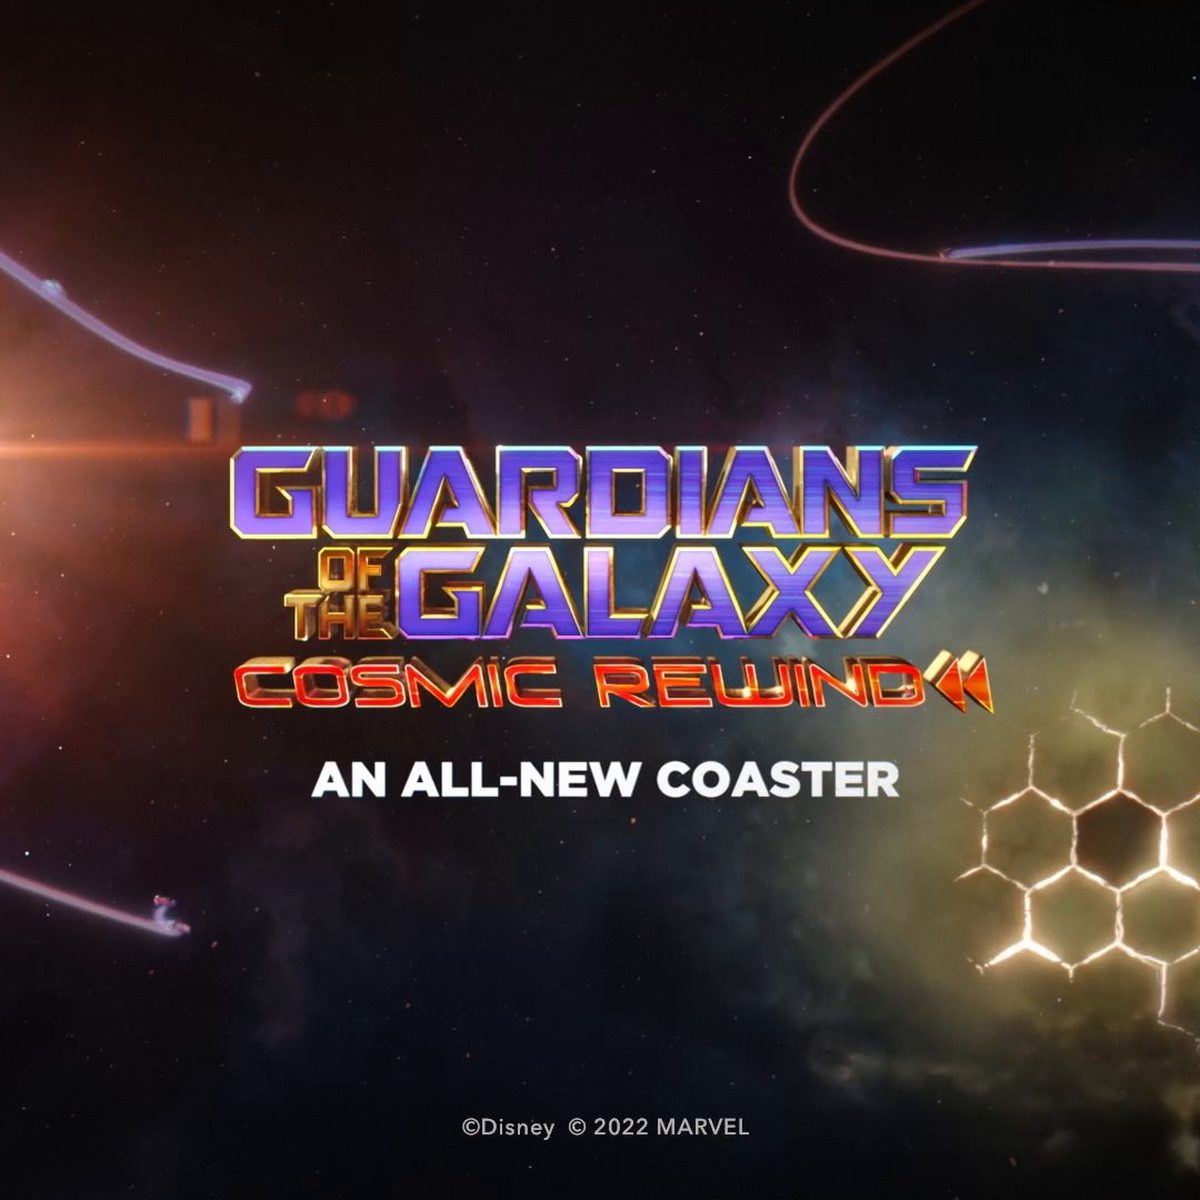 Disney's Guardians of the Galaxy Cosmic Rewind trailer revealed